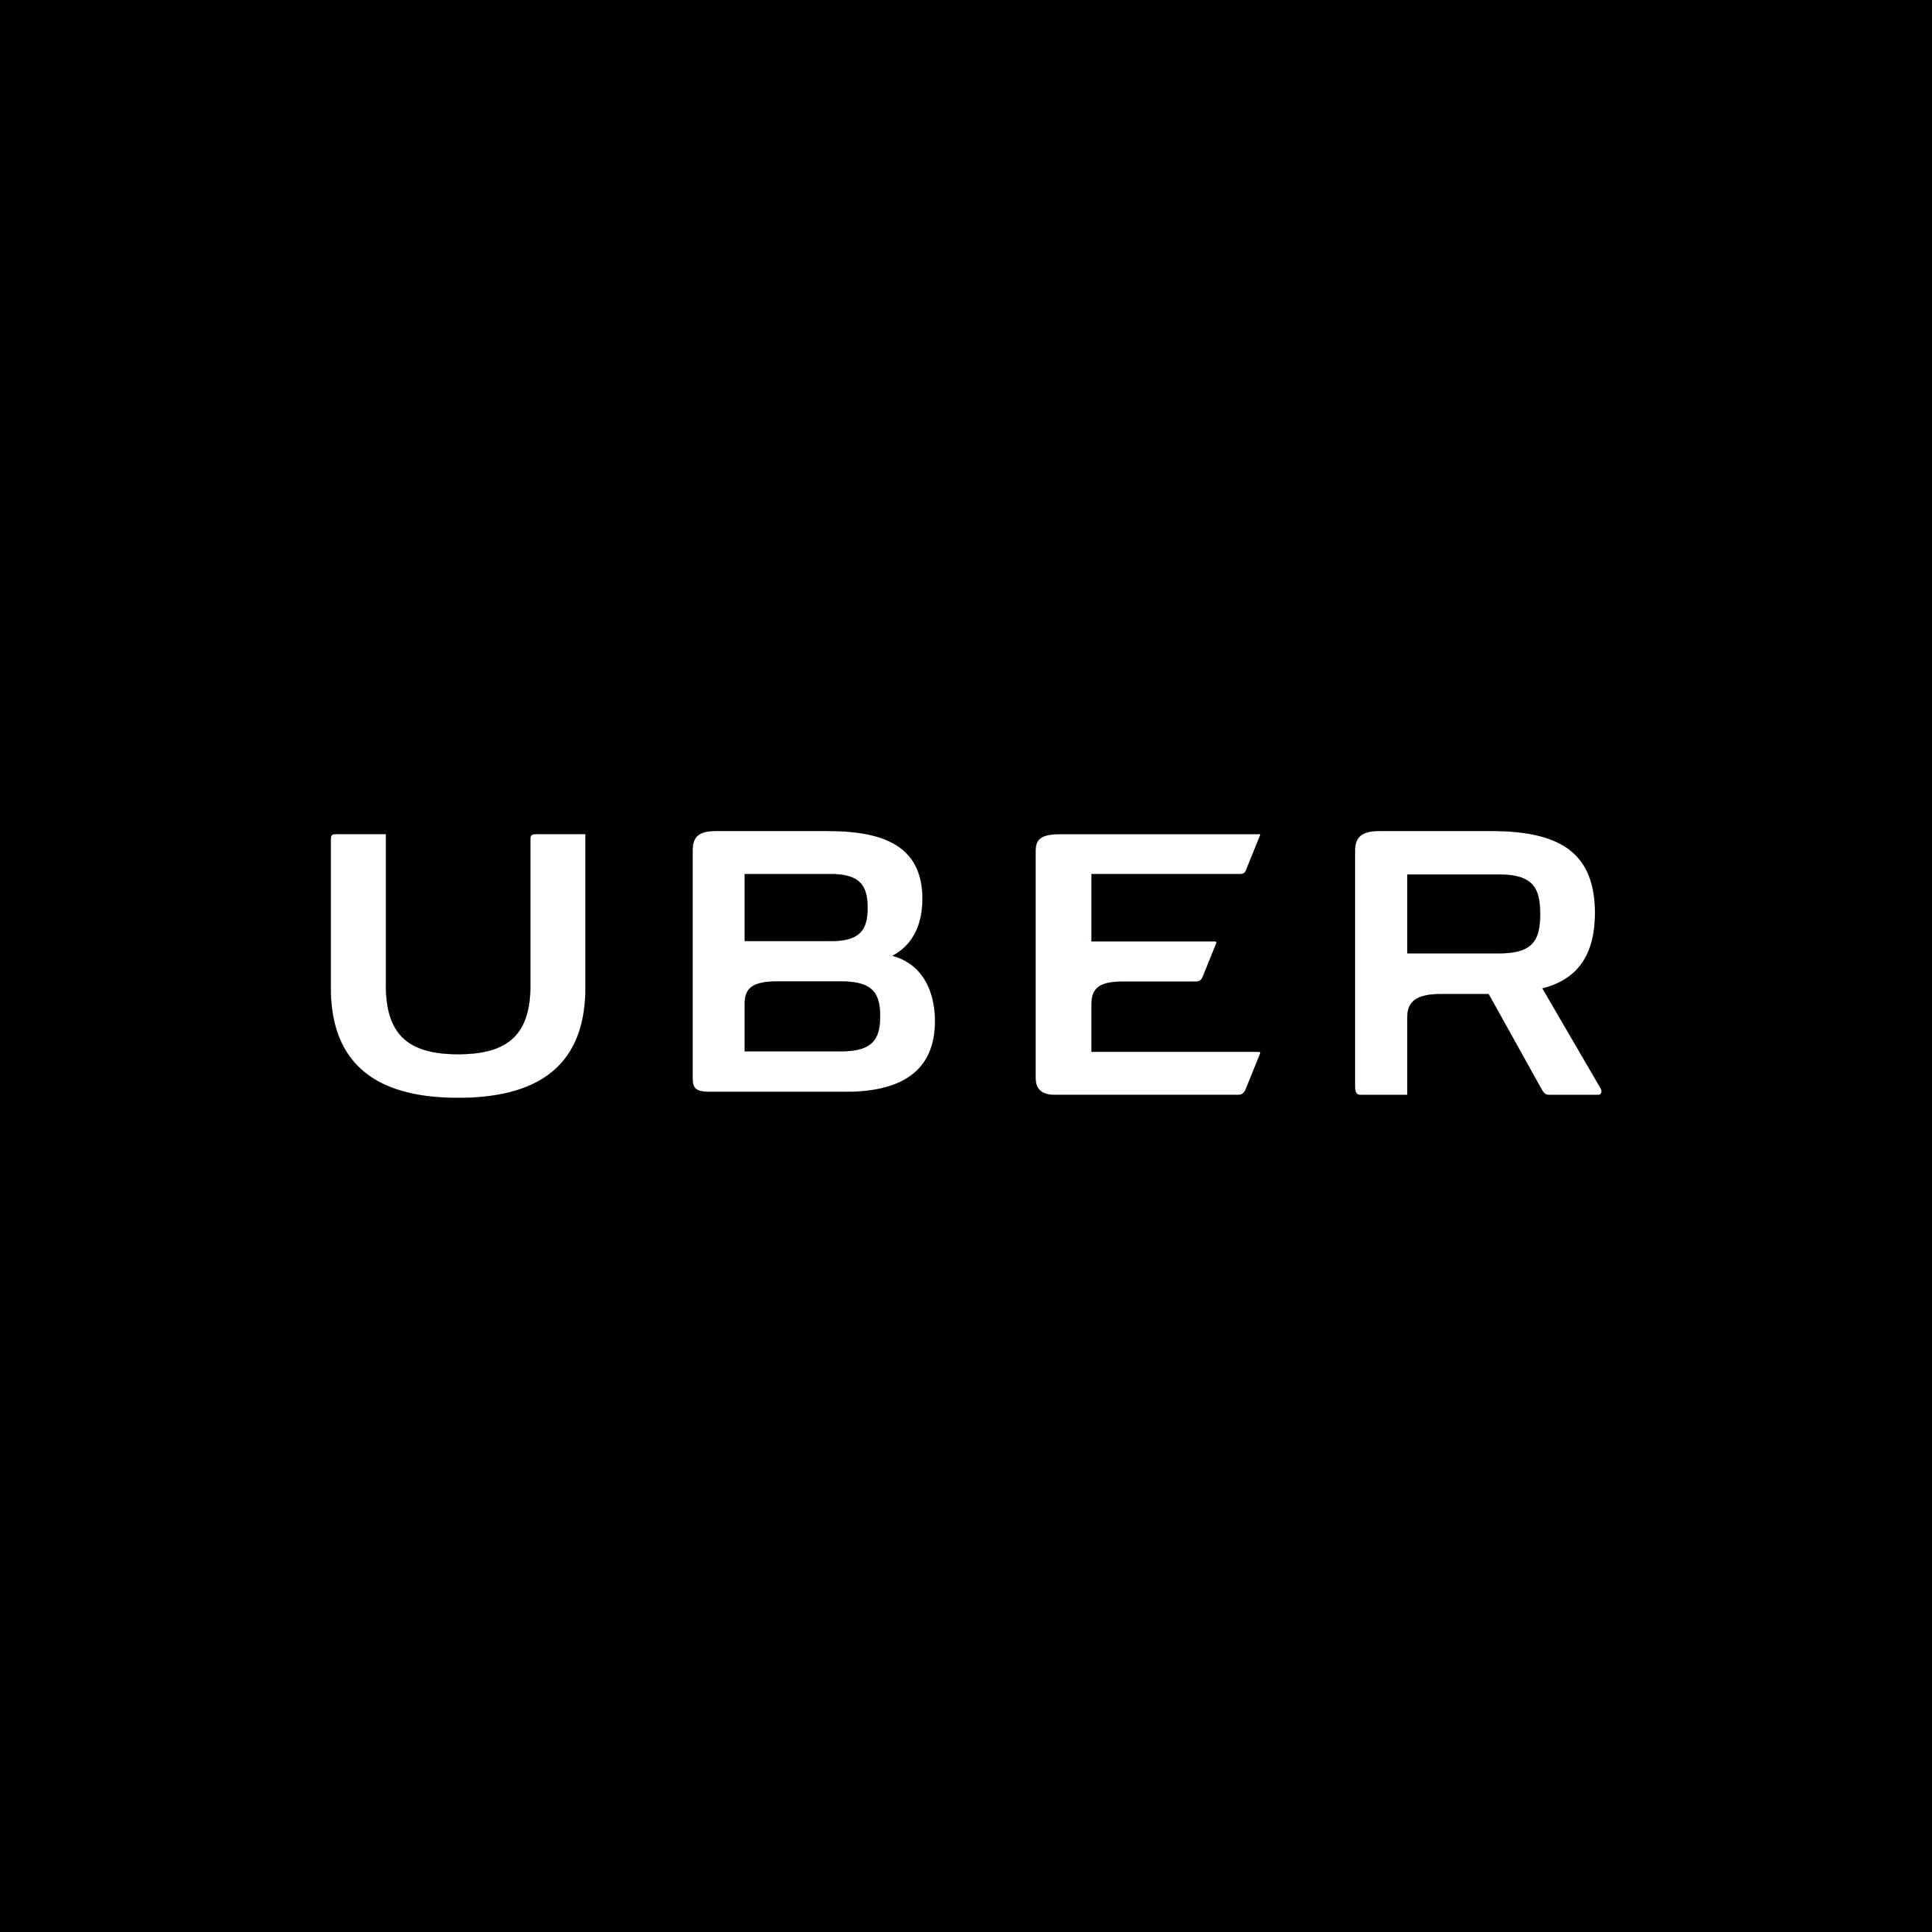 Uber Technologies Inc. is an American private hire company headquartered in San Francisco, California, United States, operating in 633 cities worldwide. It develops, markets and operates the Uber car transportation and food delivery mobile apps. Uber drivers use their own cars[6][7] although drivers can rent a car to drive with Uber.[8]
The name 